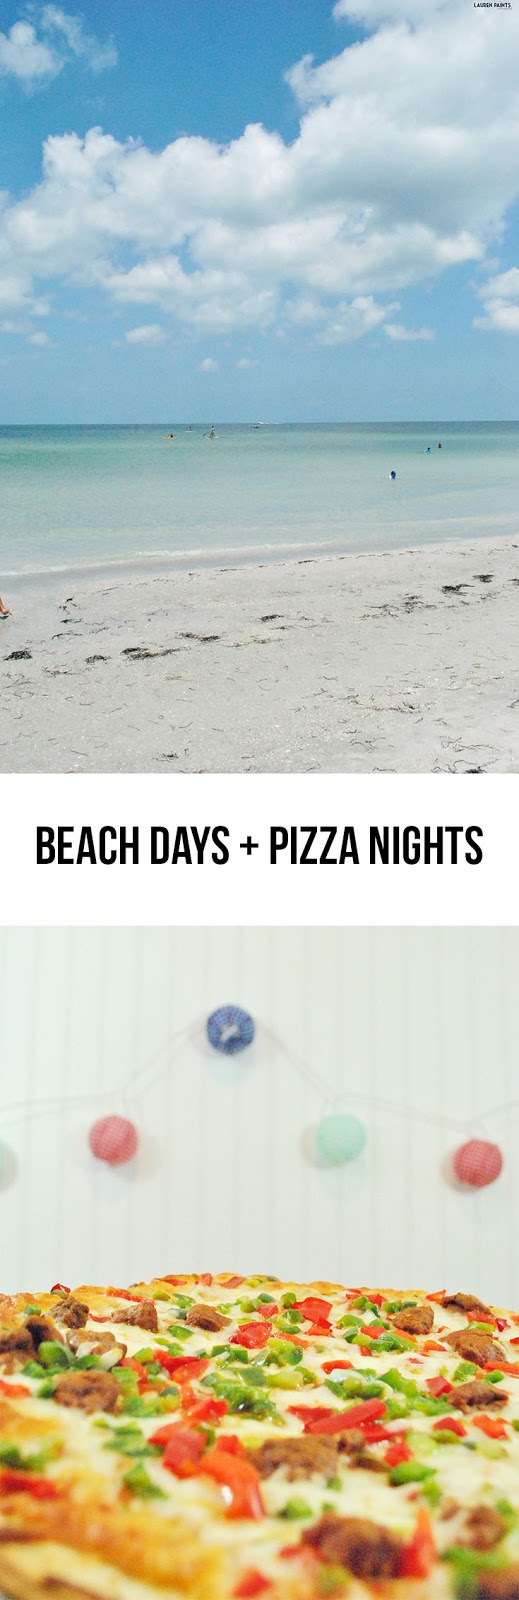 Beach Days and Pizza Nights - Dig Into Something Different with Tombstone!